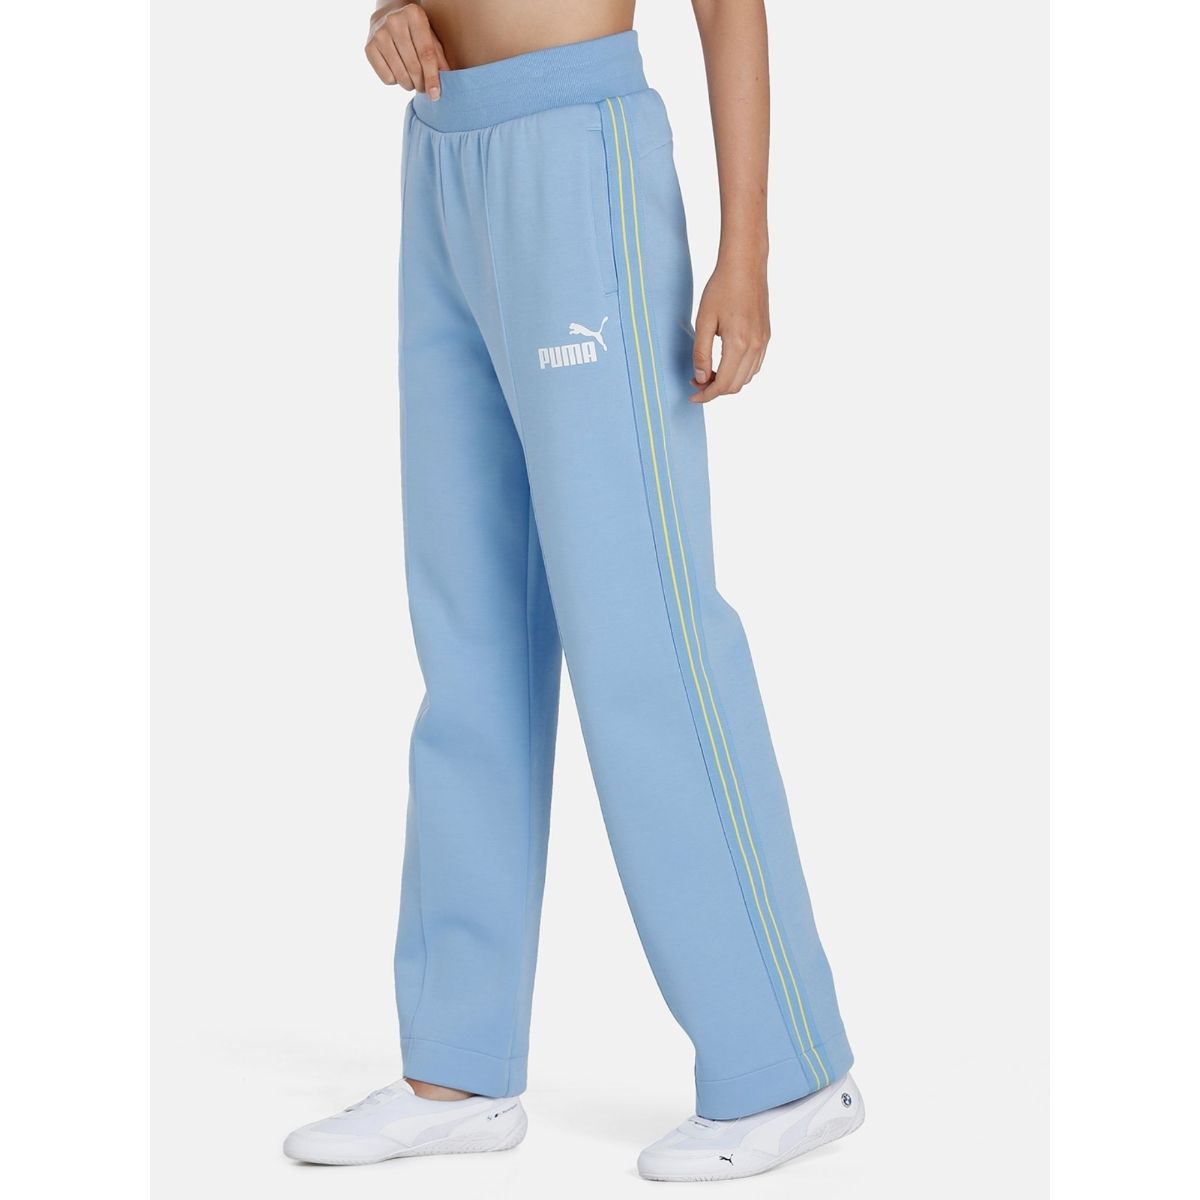 EXOLACE Striped Women Dark Blue Track Pants - Buy EXOLACE Striped Women  Dark Blue Track Pants Online at Best Prices in India | Flipkart.com